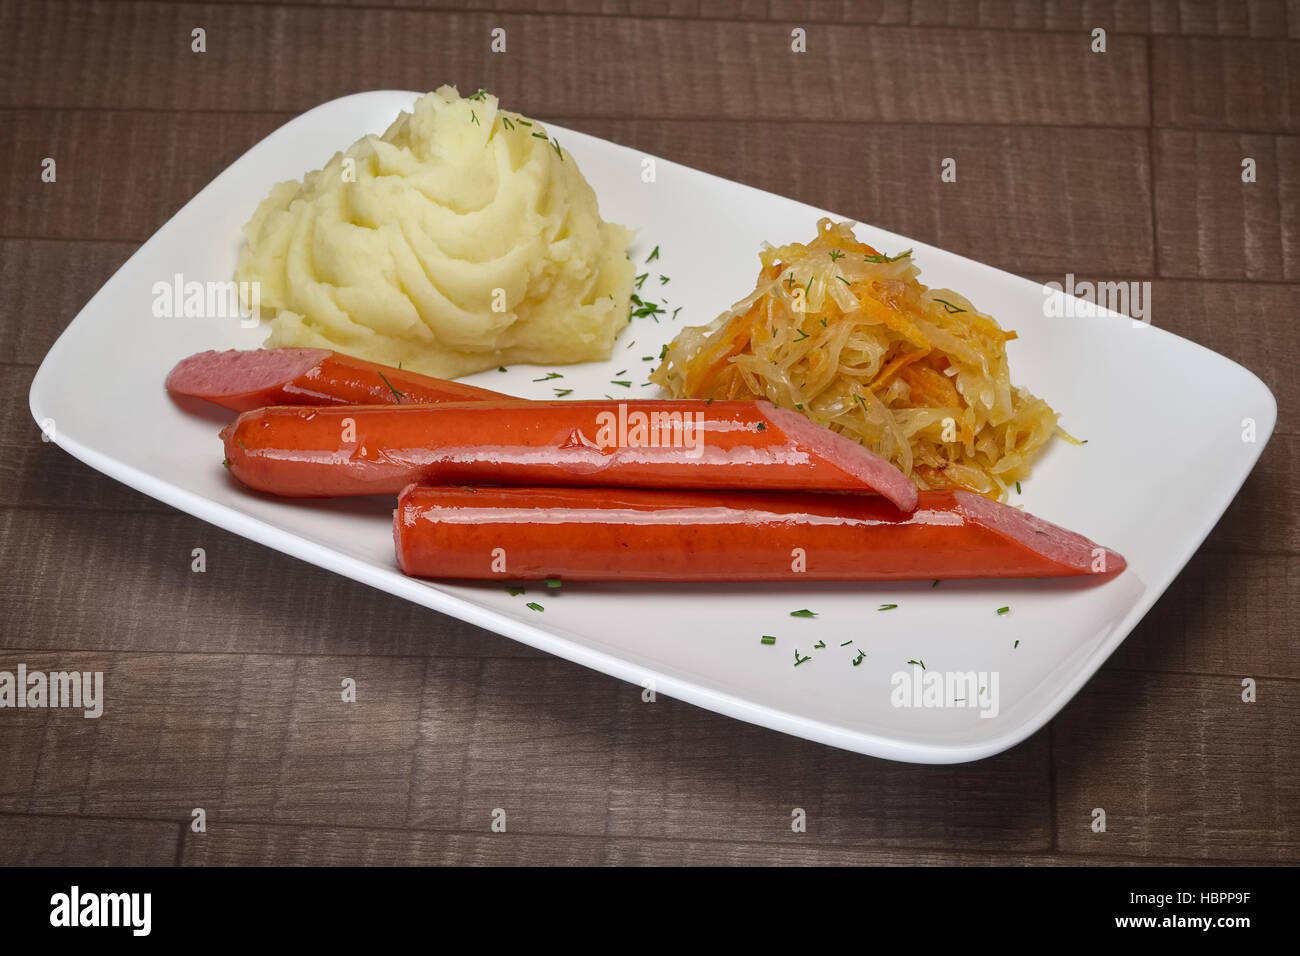 Frankfurter sausage fried cabbage and mashed potato on wooden table Stock Photo